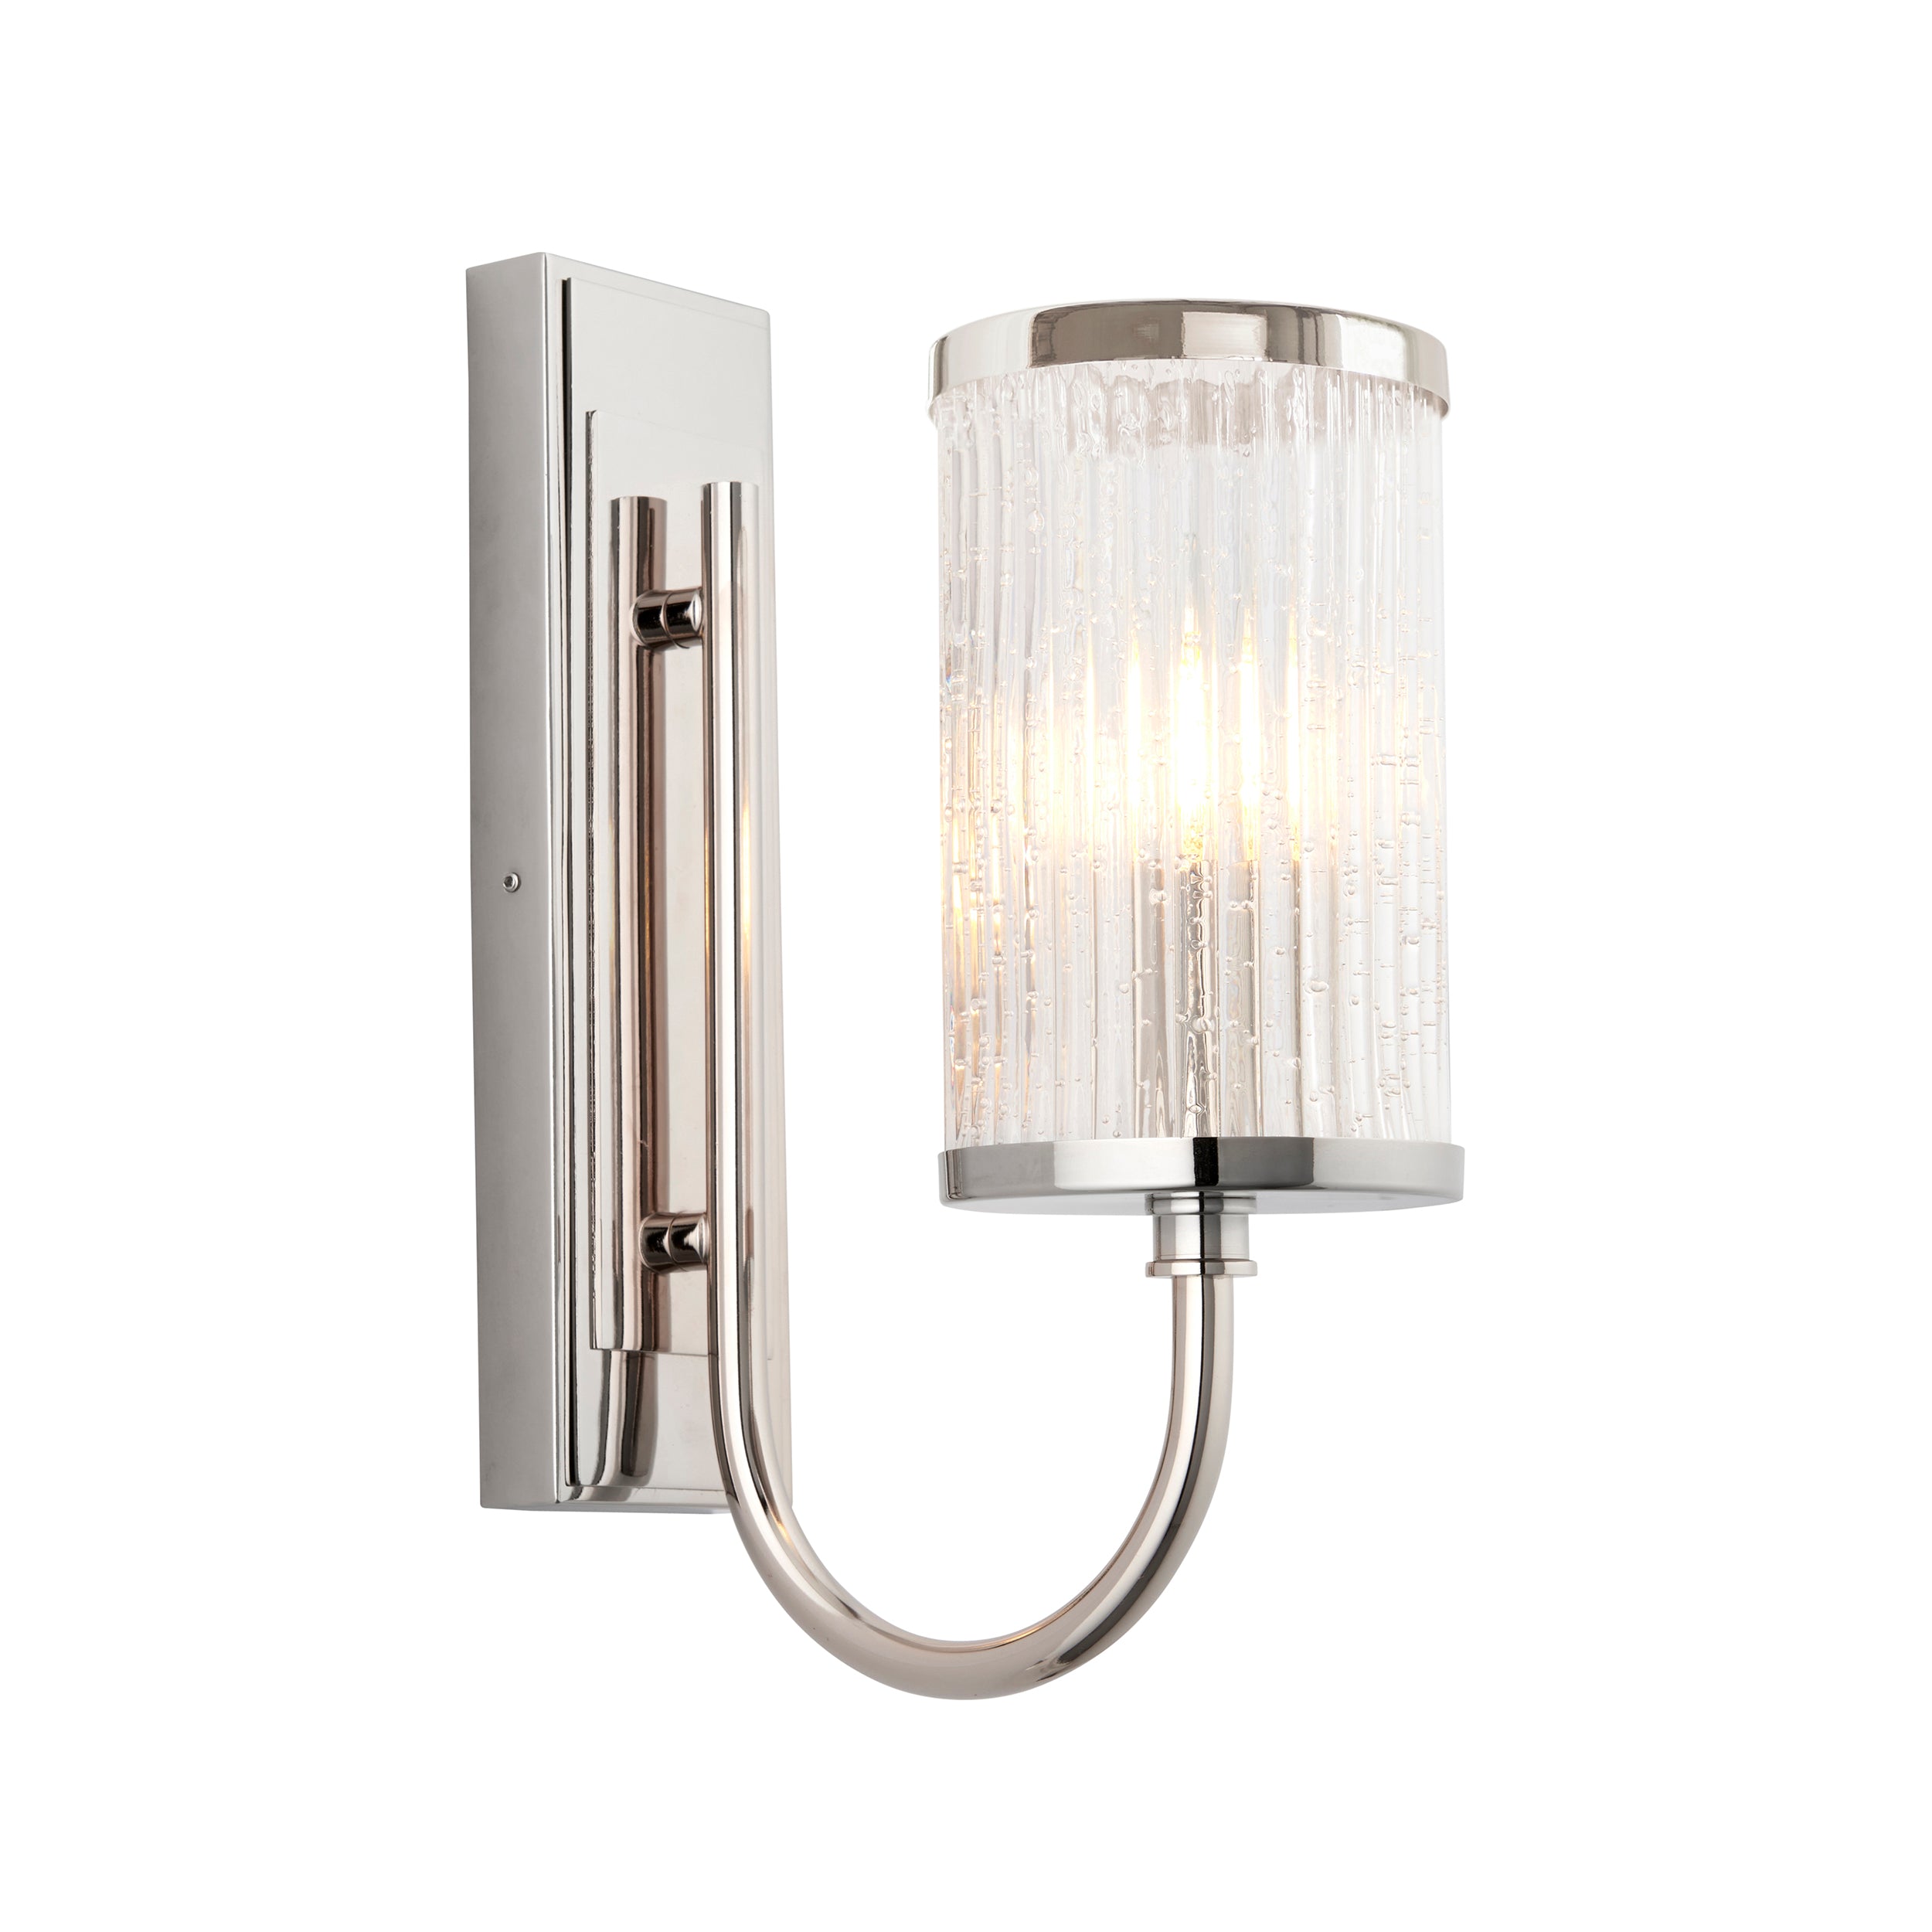 Lightologist Bright nickel plate & ribbed bubble glass Glass Wall Light WIN13100040